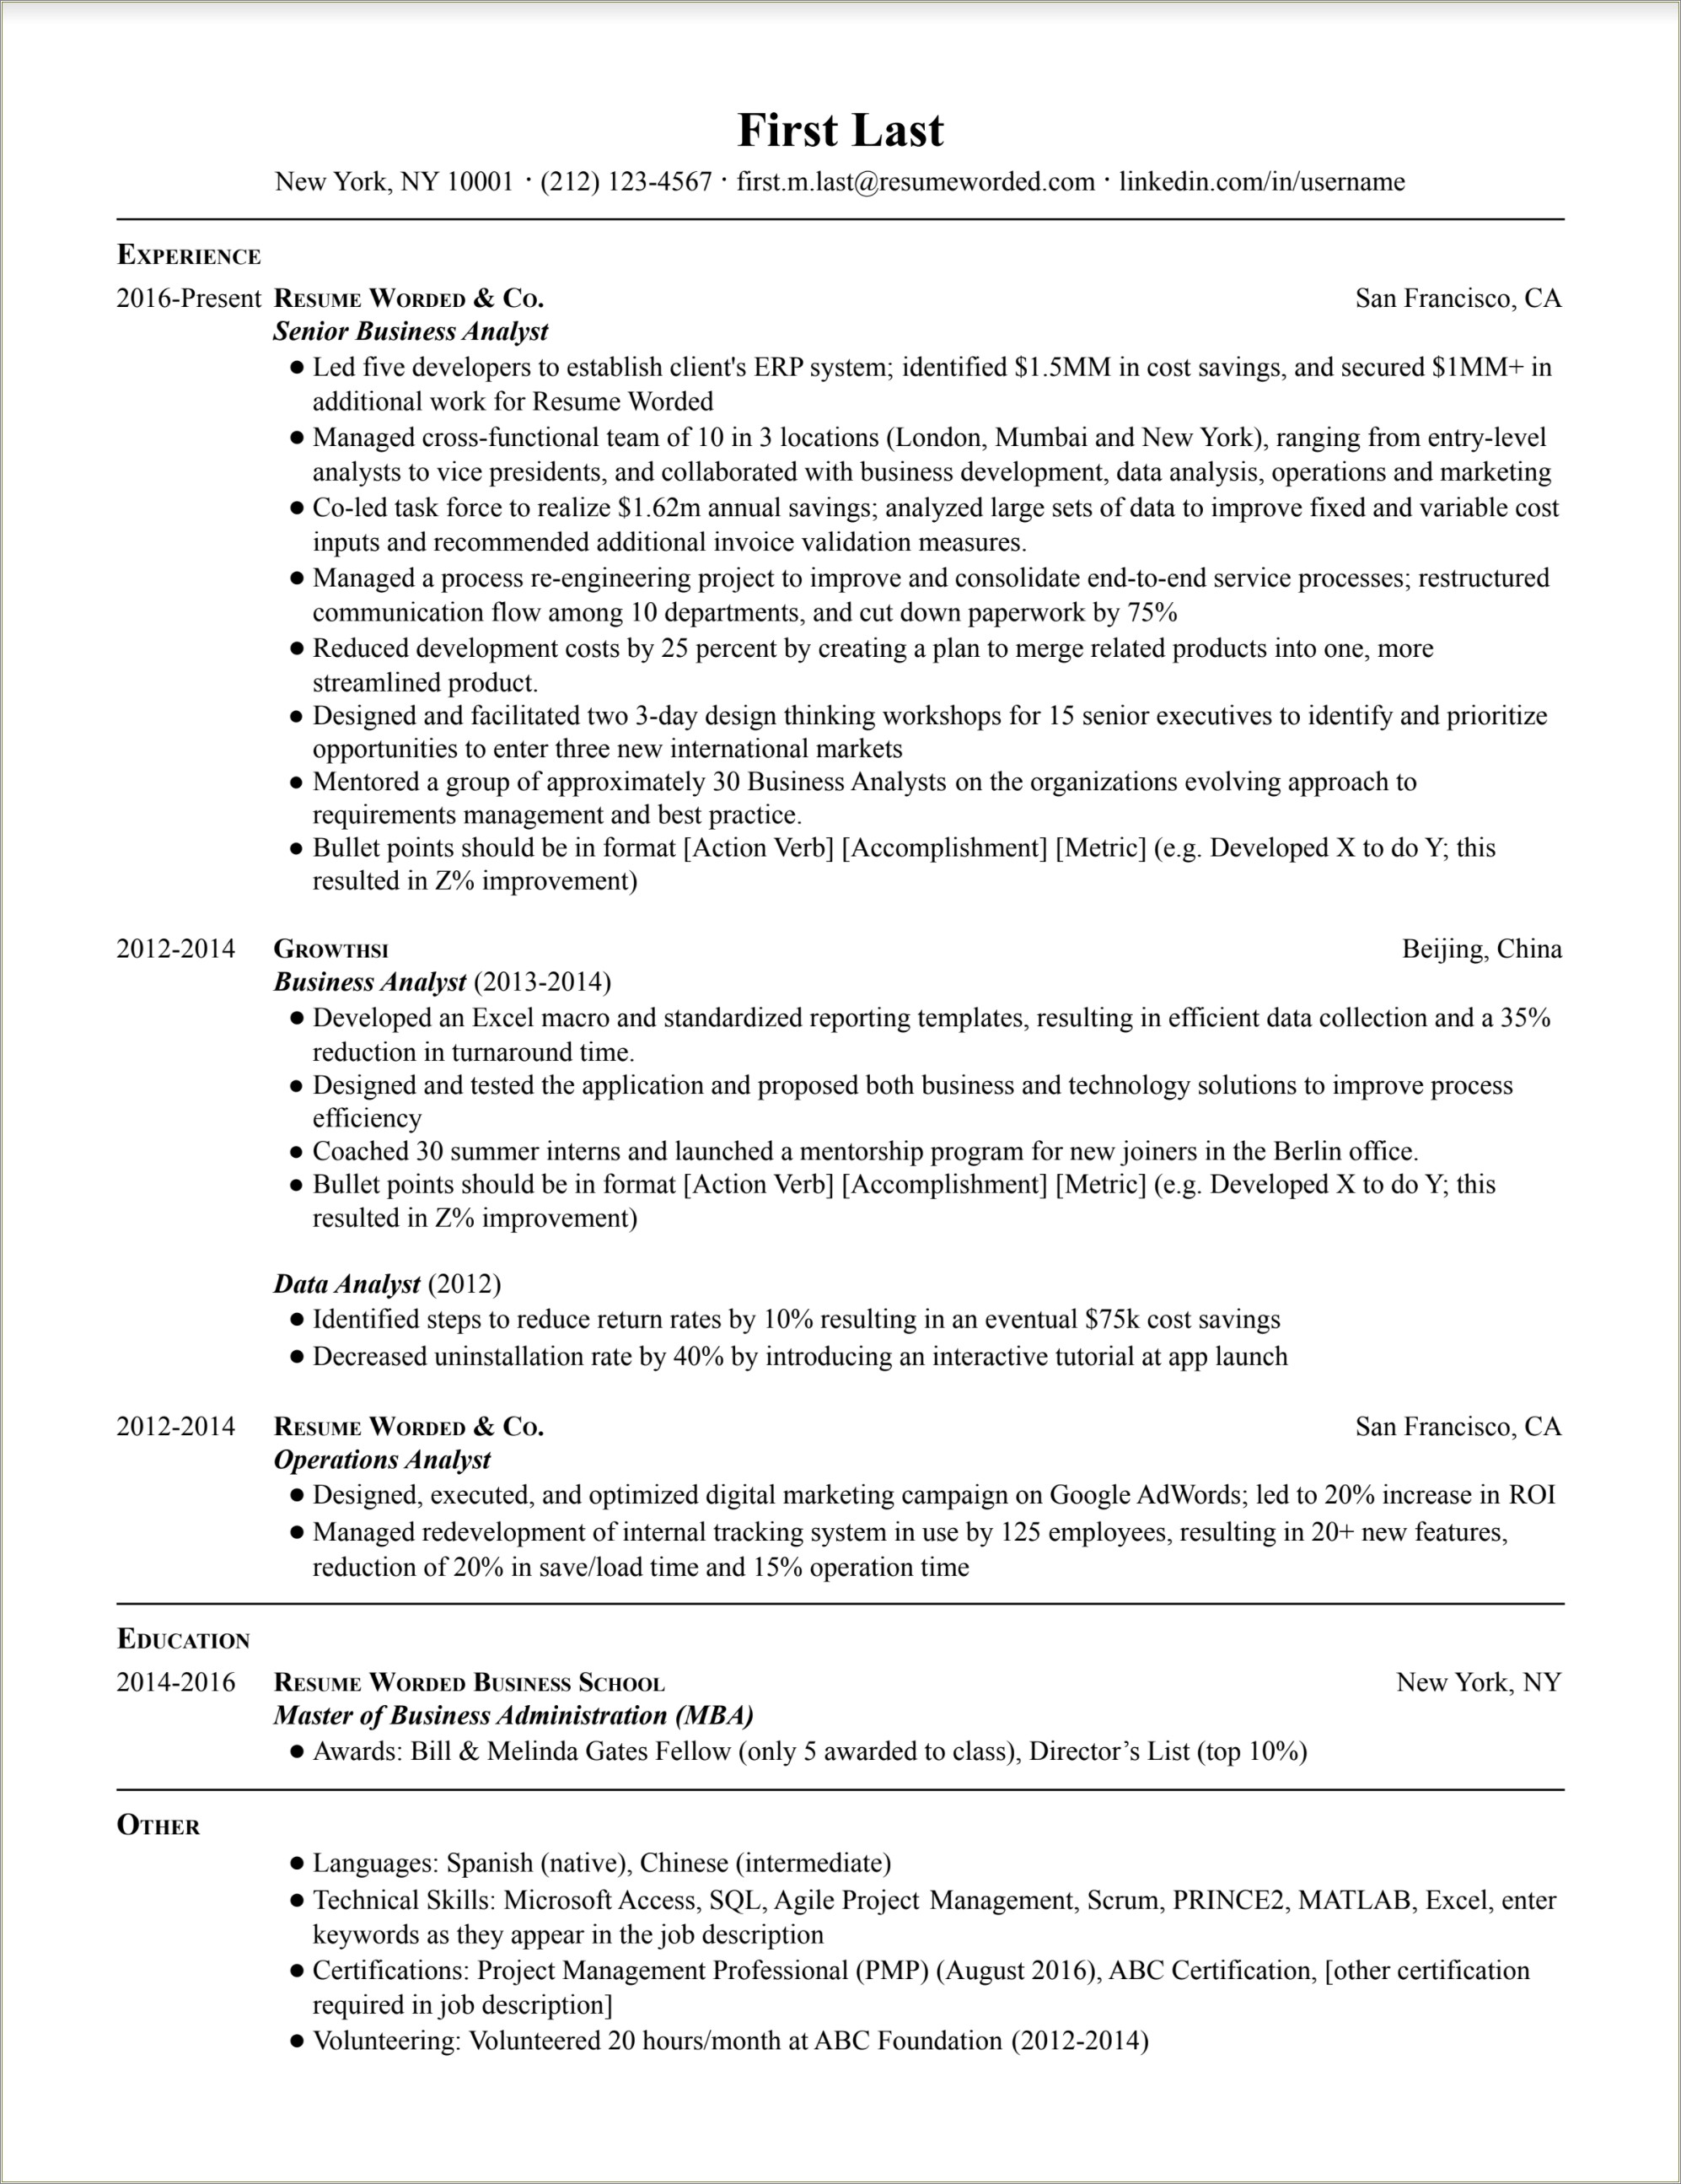 Resume Objective To Work For Google